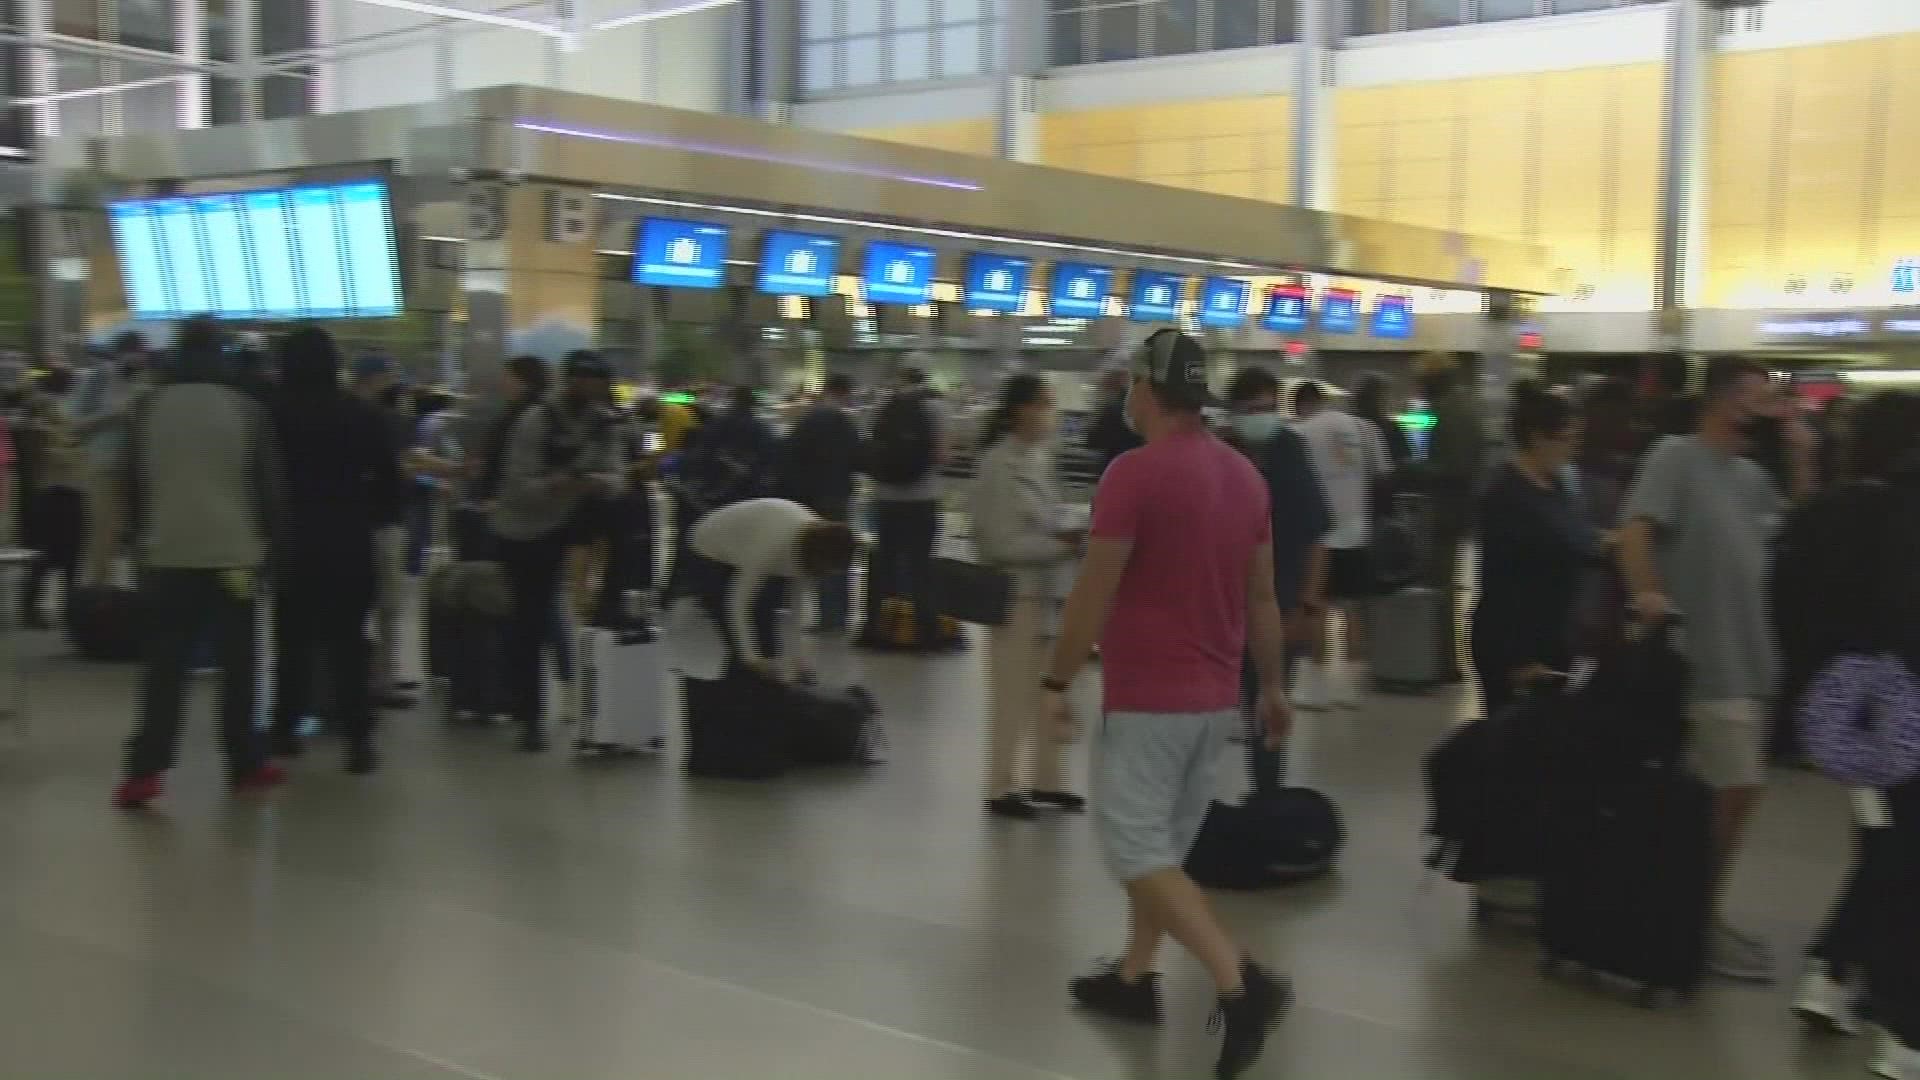 Raleigh-Durham International Airport said it had a 'major power outage' Friday morning that impacted most flights.